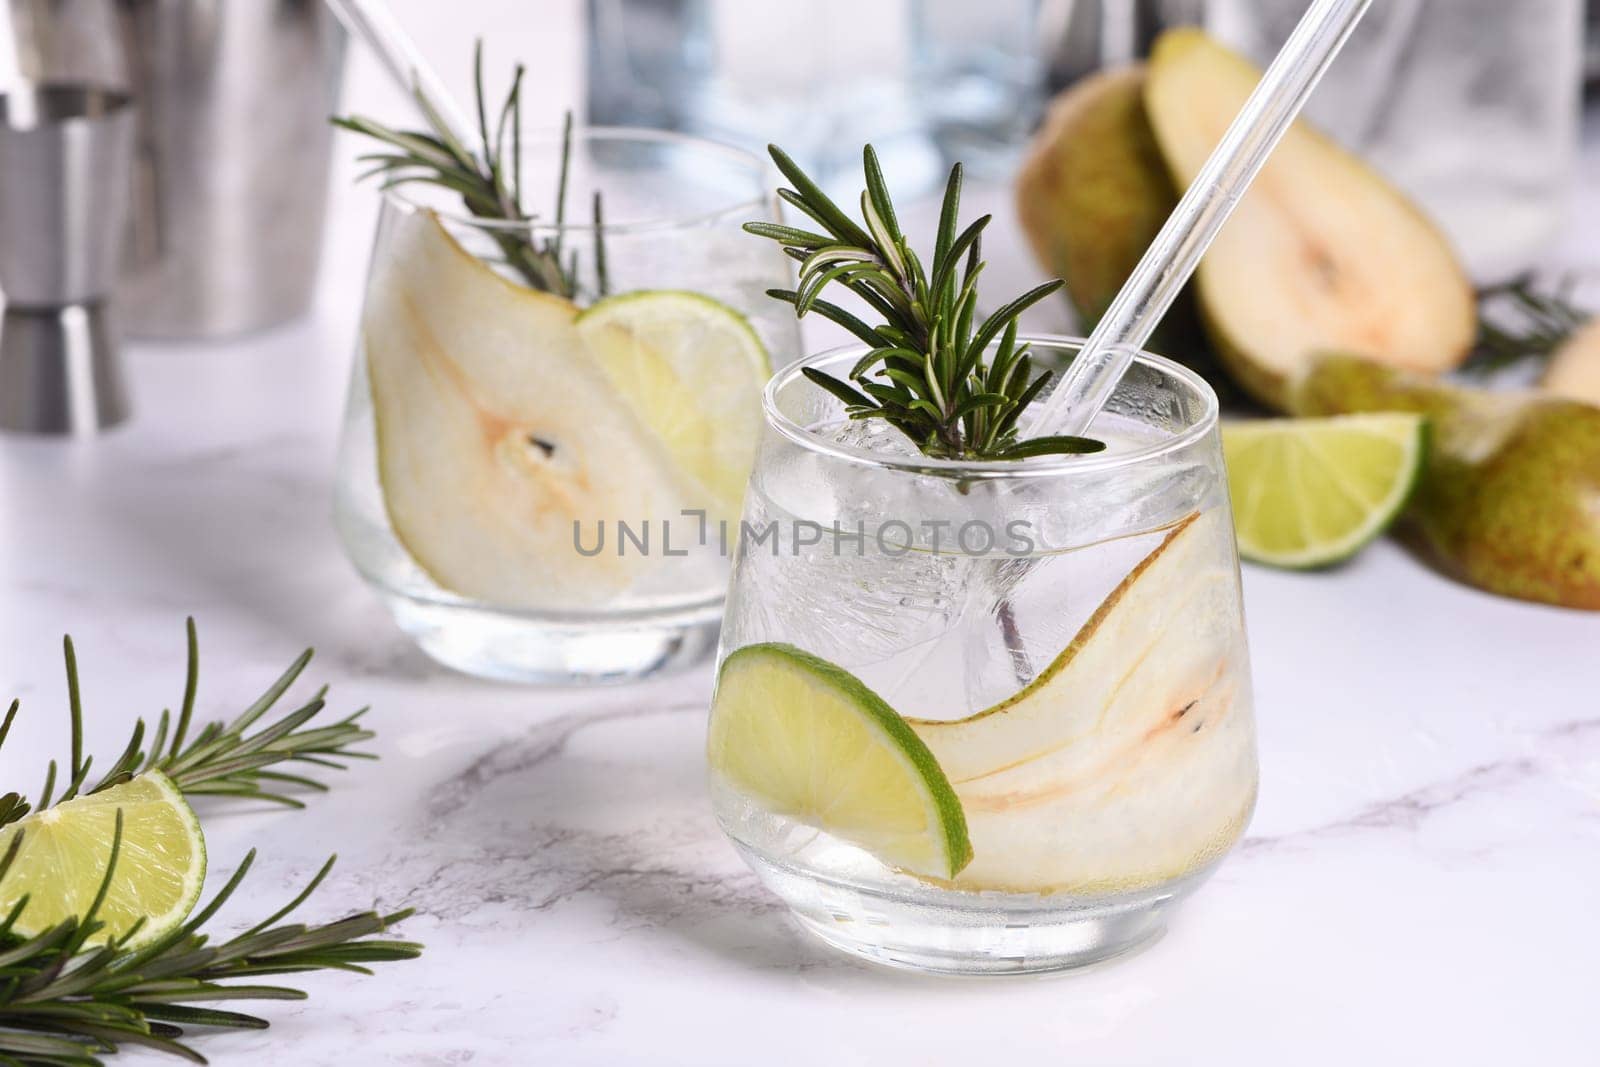 Pear Gin tonic cocktail by Apolonia